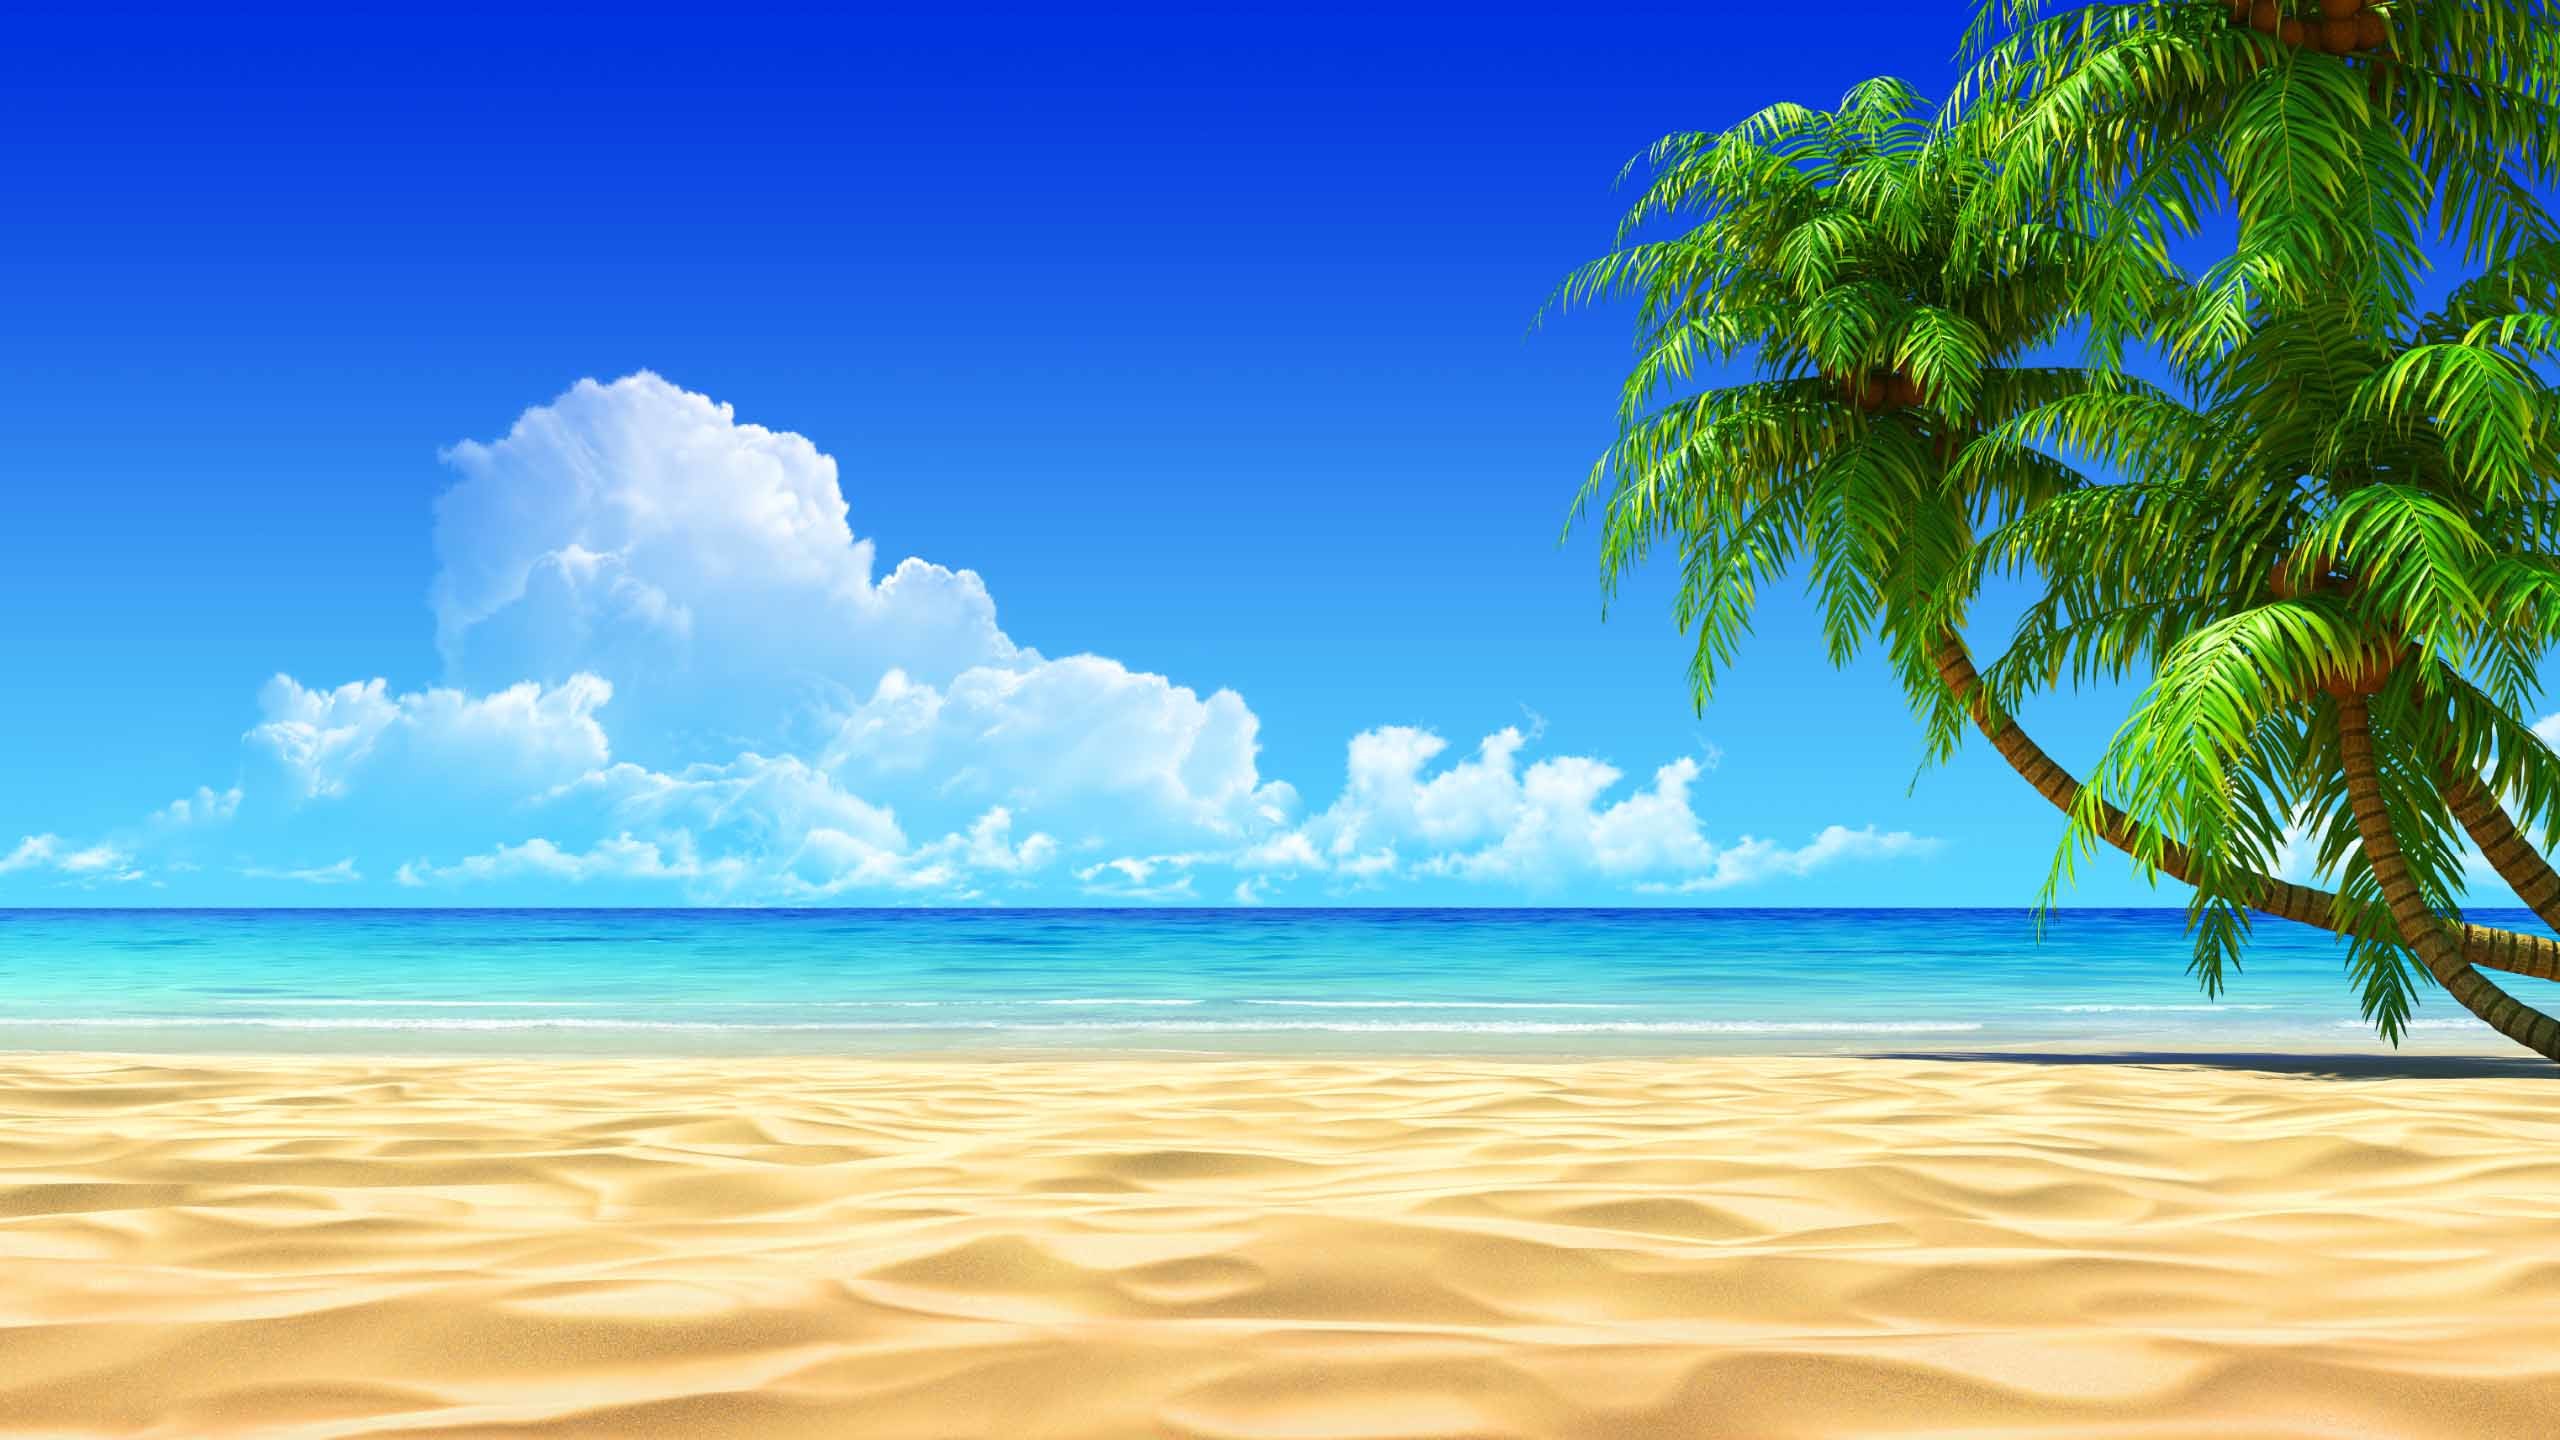 2560x1440 Tropical Beach Backgrounds Wallpapers Images Pictures Hd Wallpaper.  apartment design blog. kitchen design tool ...